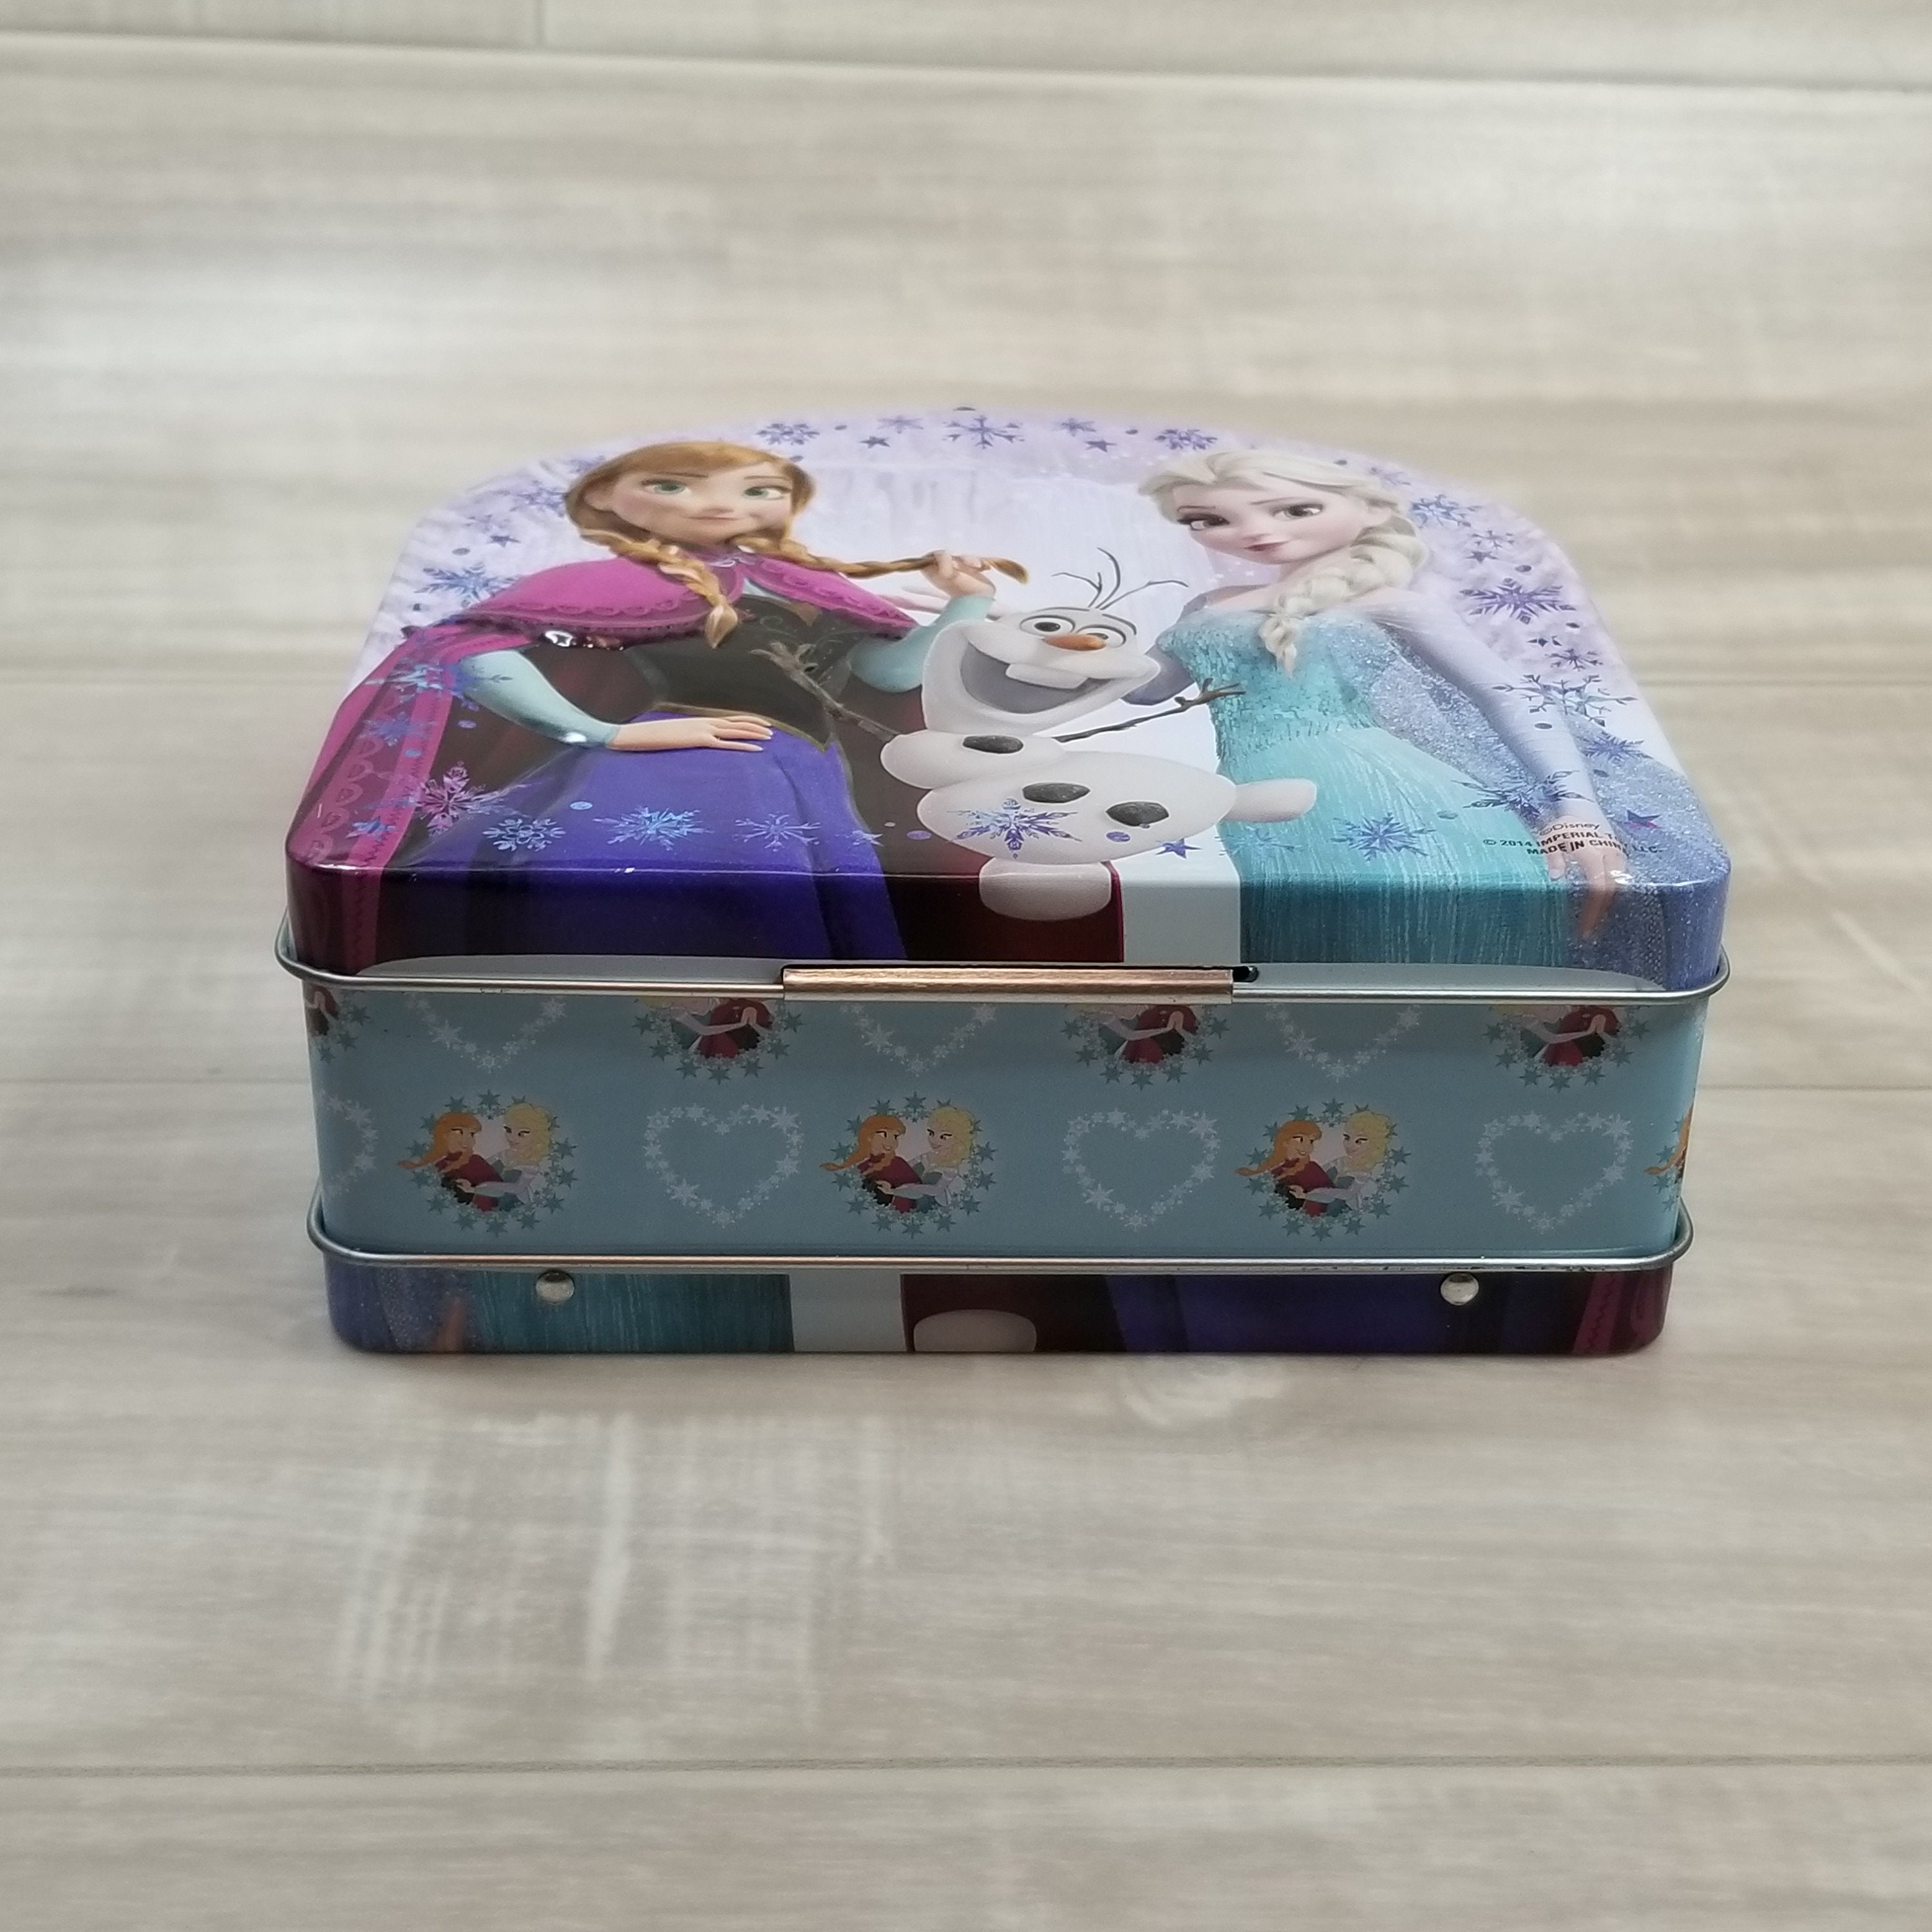 Disney Frozen Large Carry All Embossed Tin Lunch Box Set